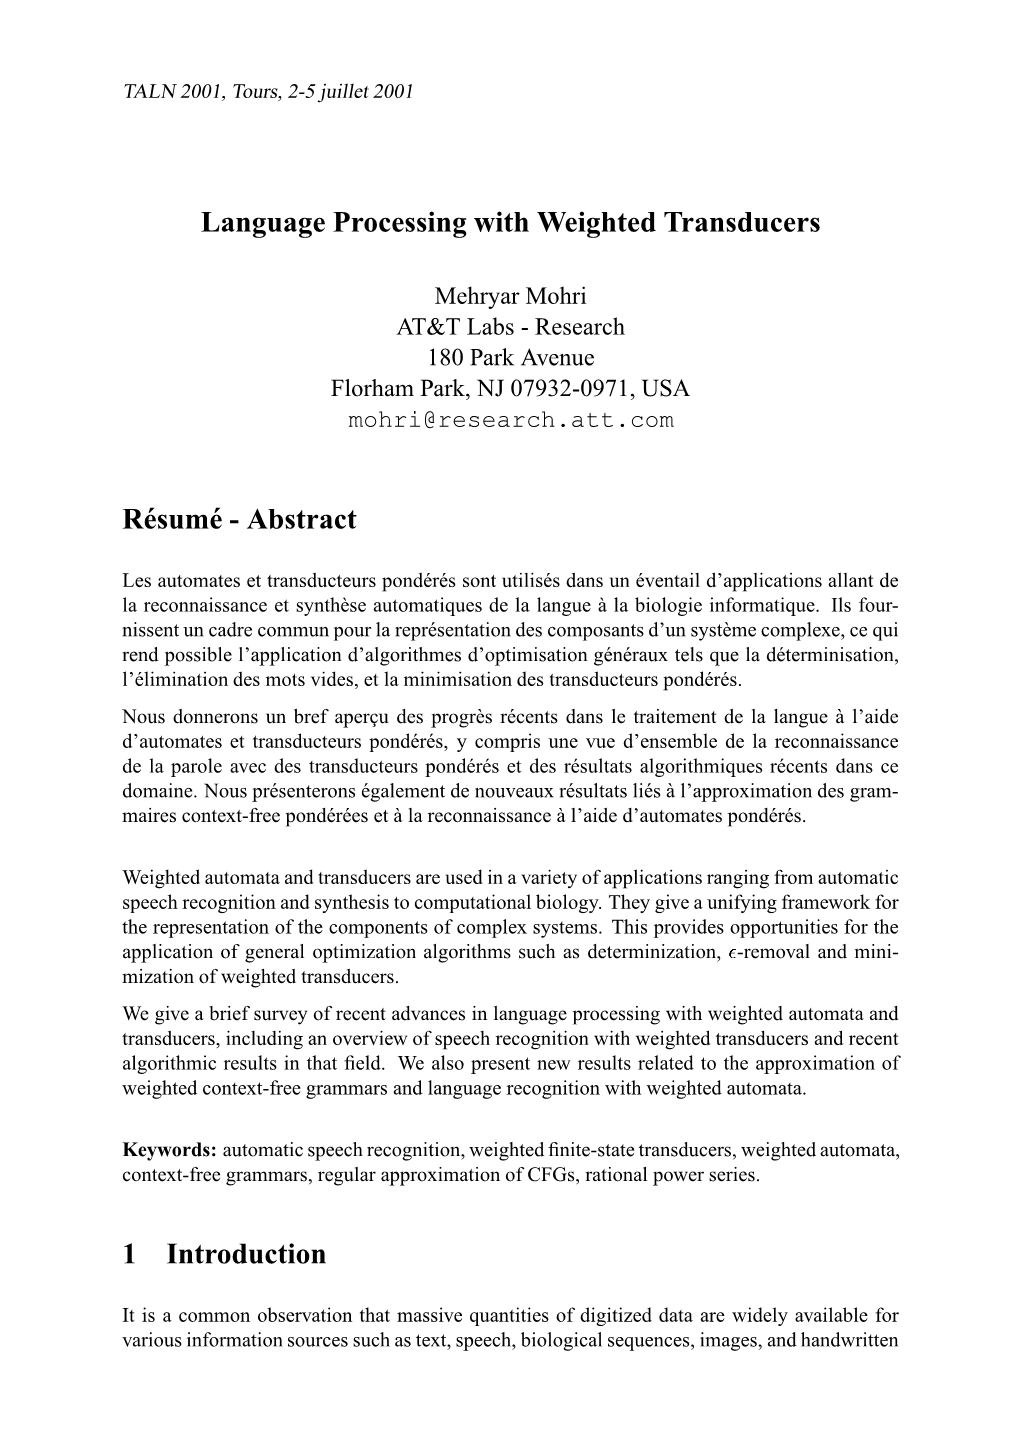 Language Processing with Weighted Transducers